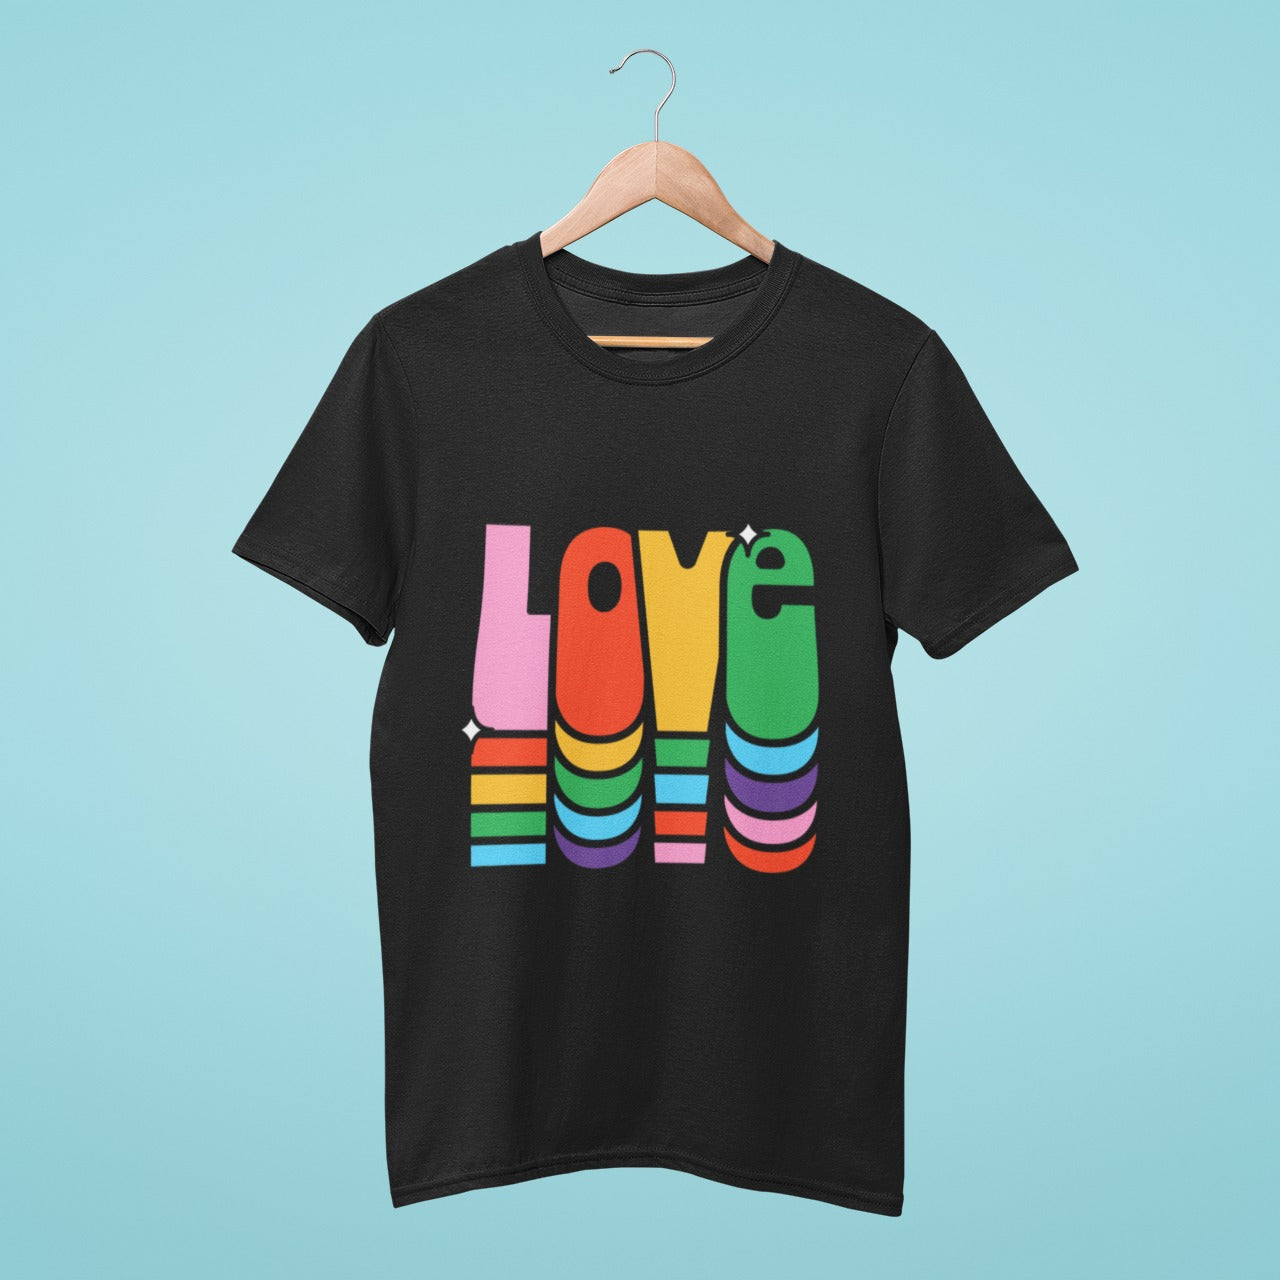 Show your support for love and pride with our black t-shirt featuring "love" in big, colorful letters. Perfect for LGBTQ+ events and Pride celebrations, this tee is both stylish and comfortable. The bold and vibrant design is a powerful symbol of acceptance and inclusivity, spreading the message of love and equality everywhere you go. Order now and join the movement for a more inclusive world.